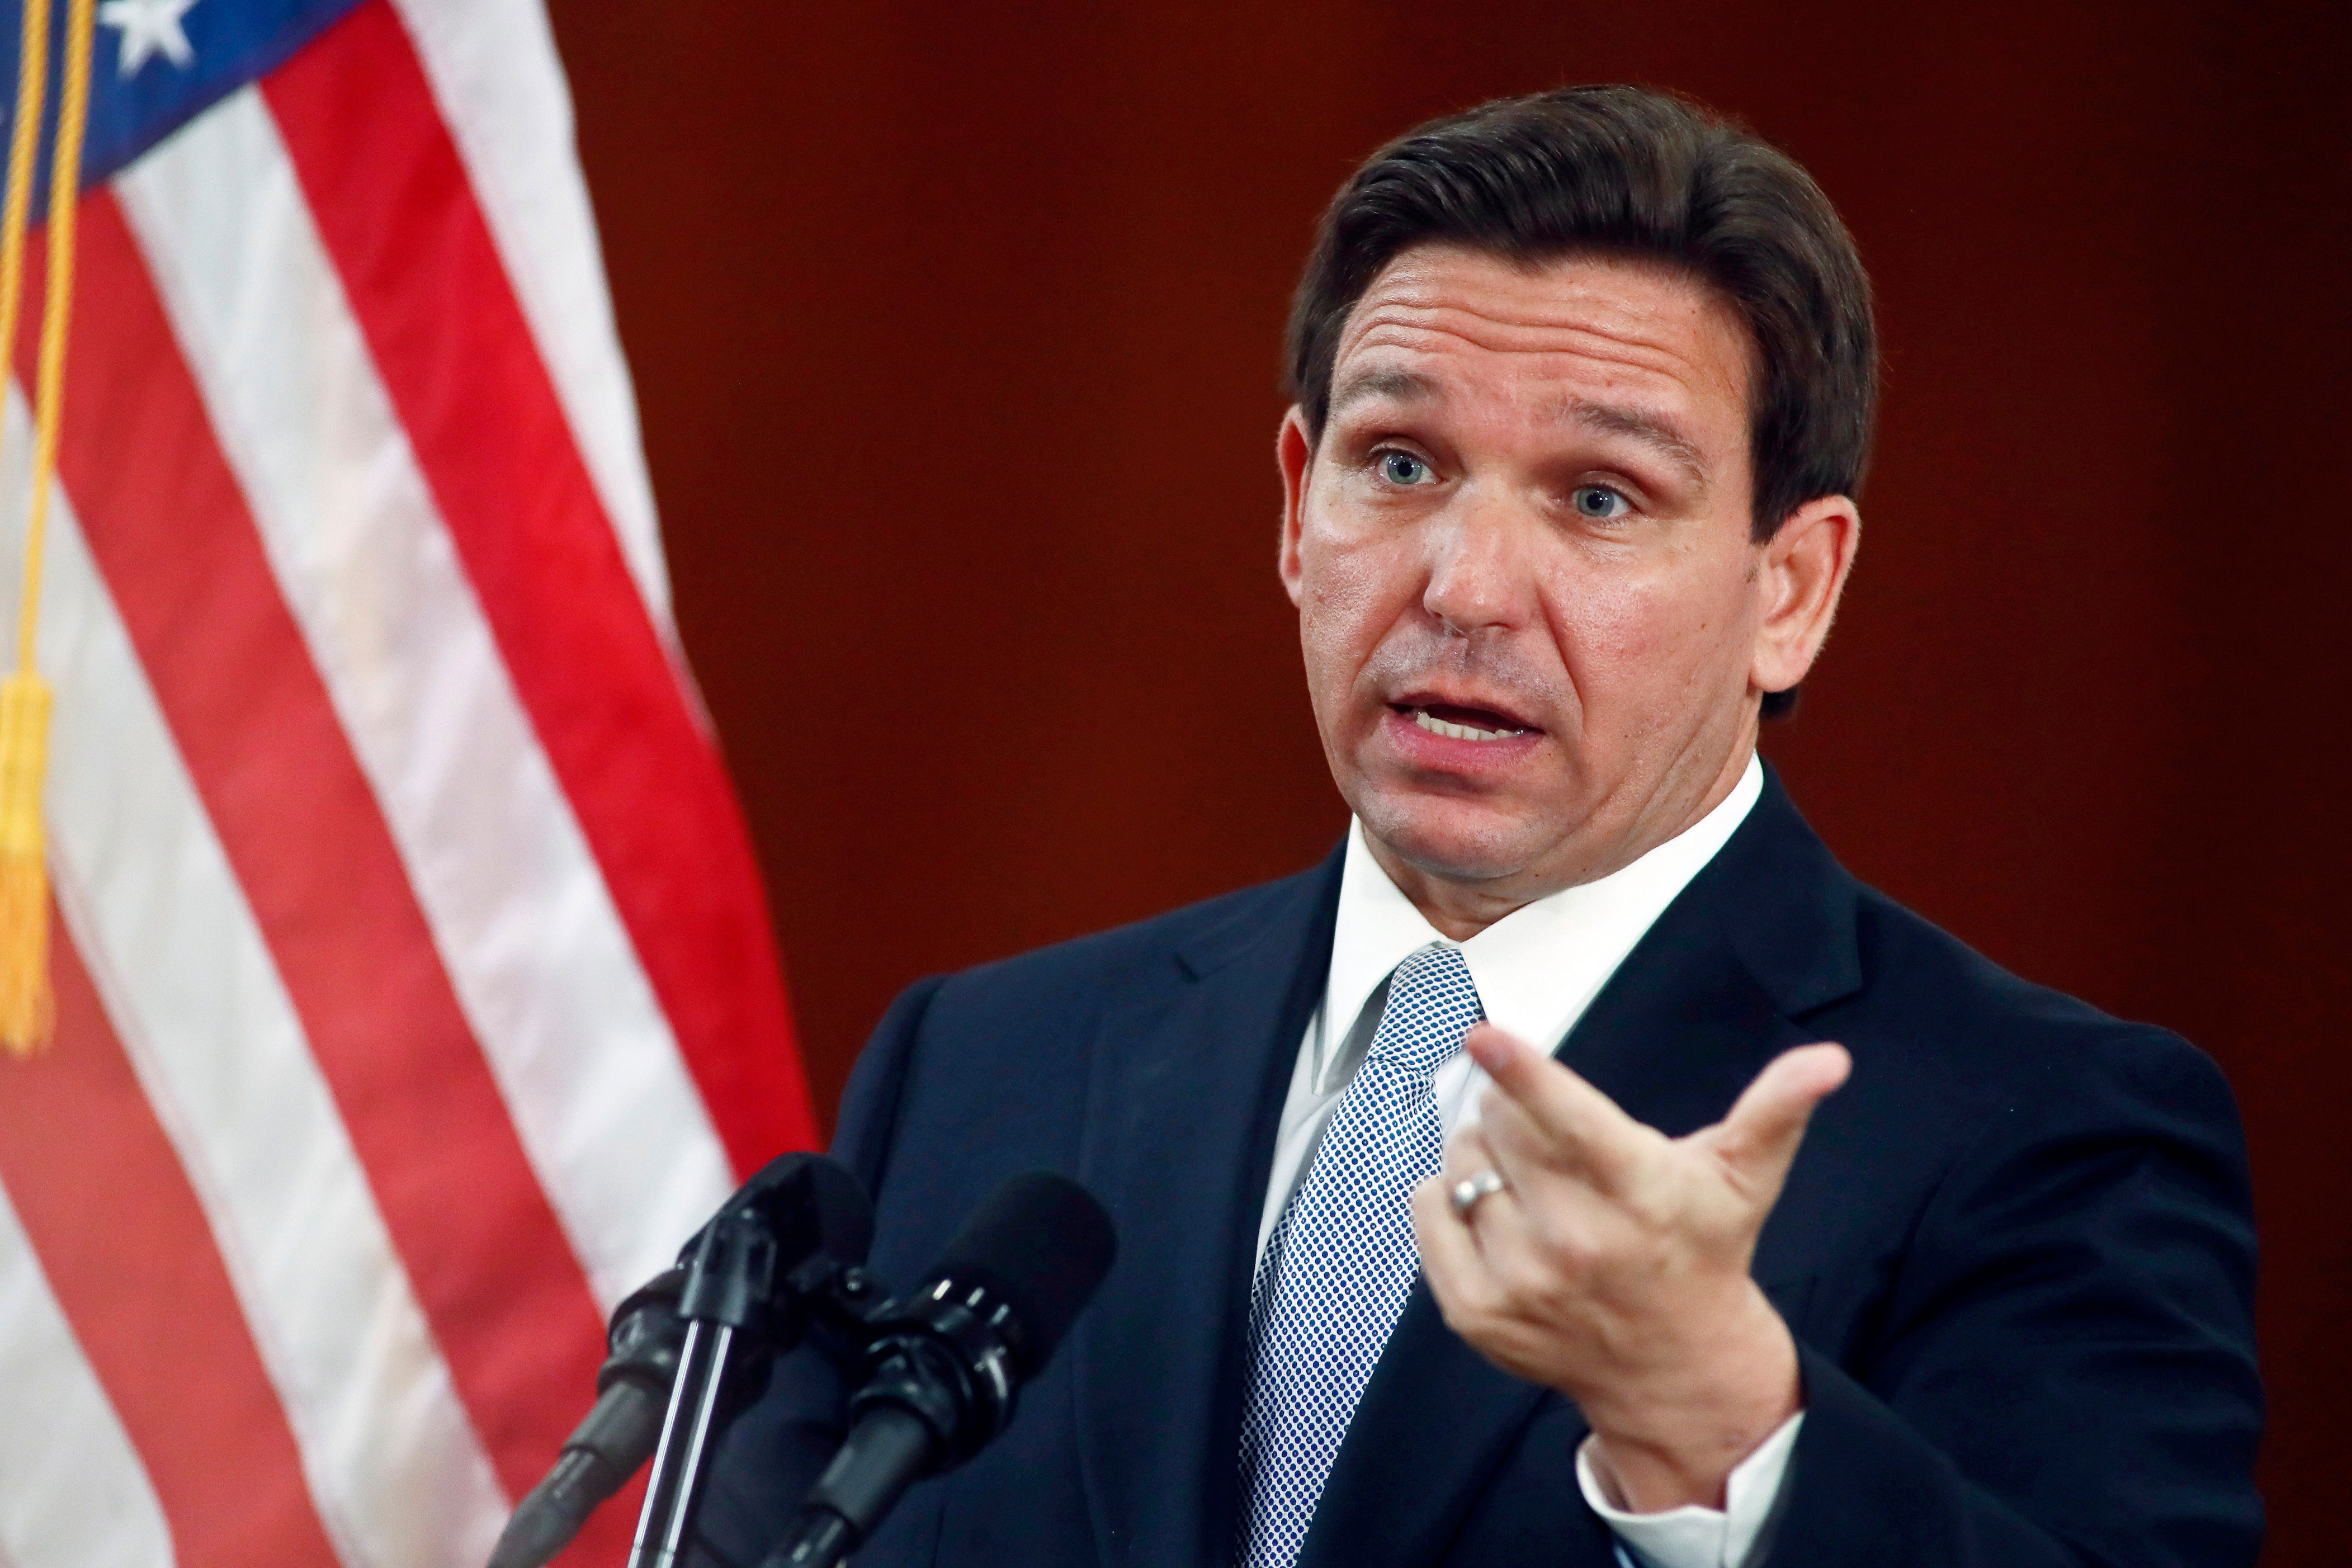 desantis signs bill to roll out communism lessons in florida public schools